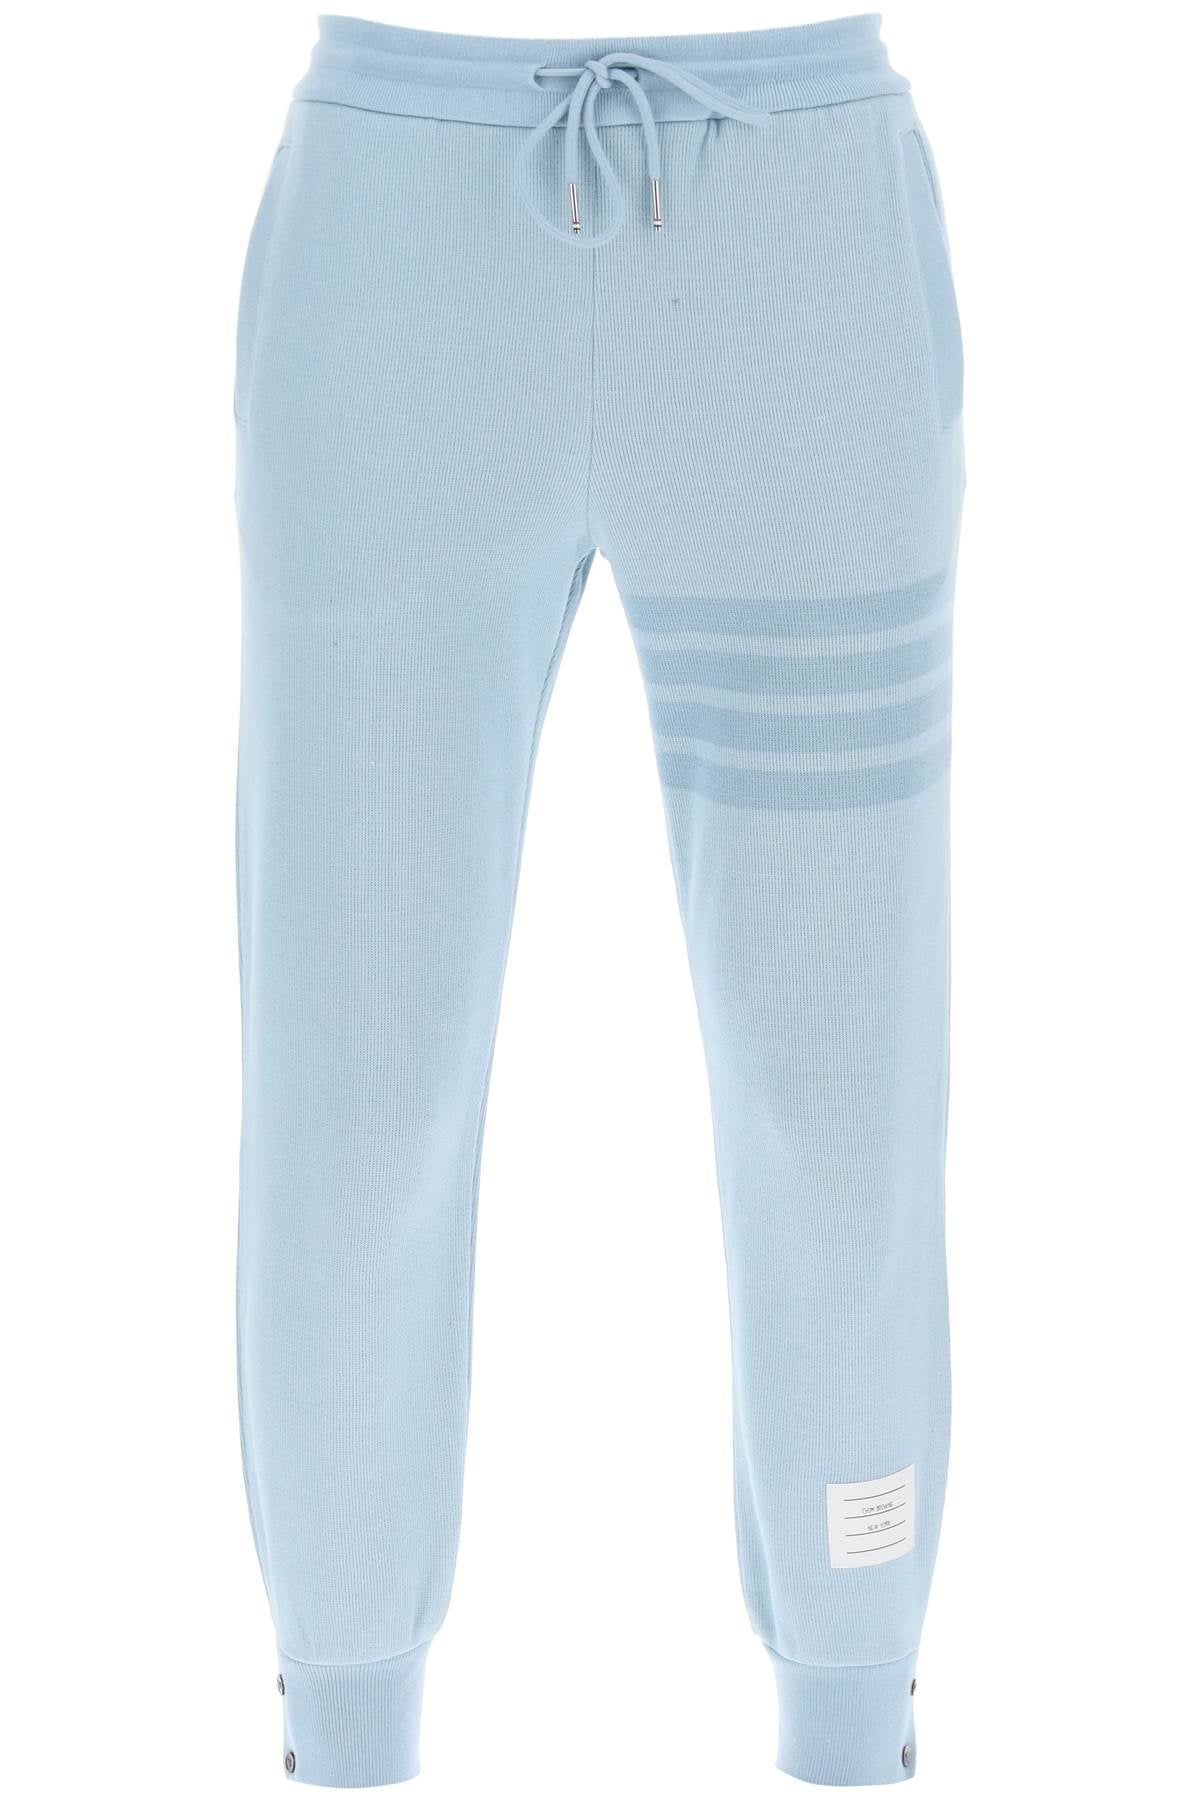 Light Blue 4-Bar Joggers in Cotton Knit for Women - SS24